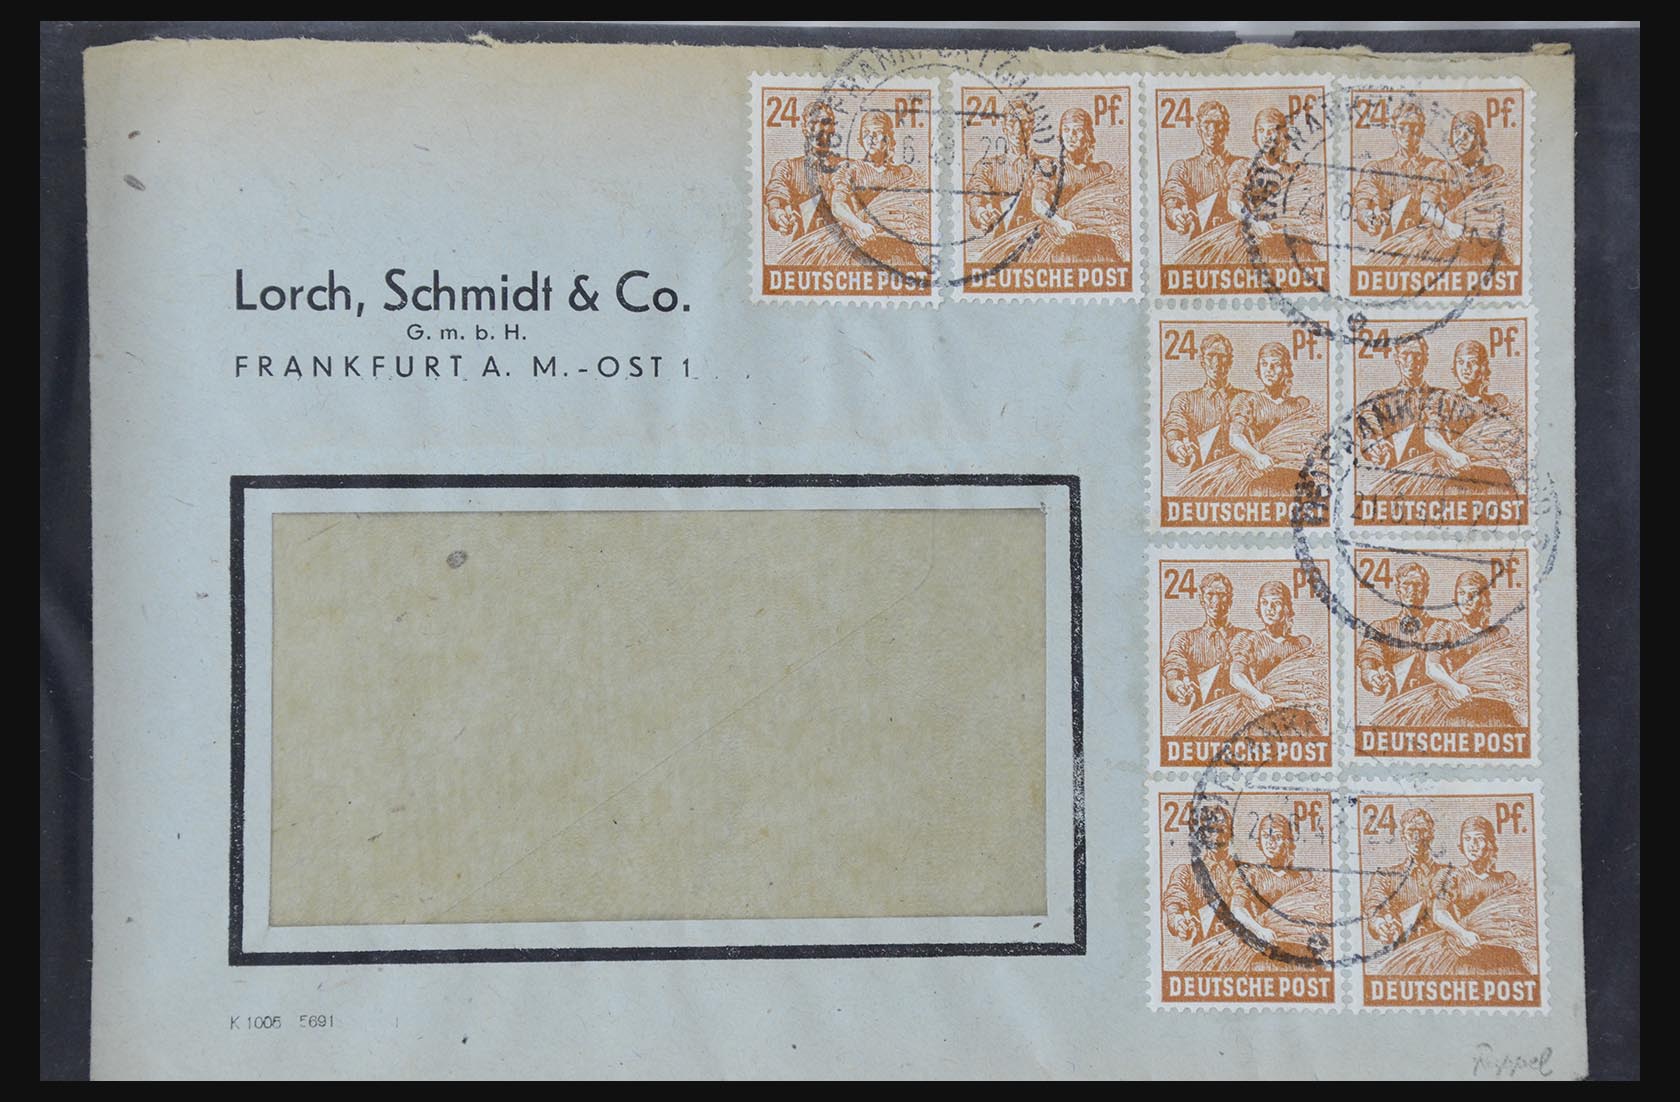 31581 011 - 31581 Germany covers and FDC's 1945-1981.